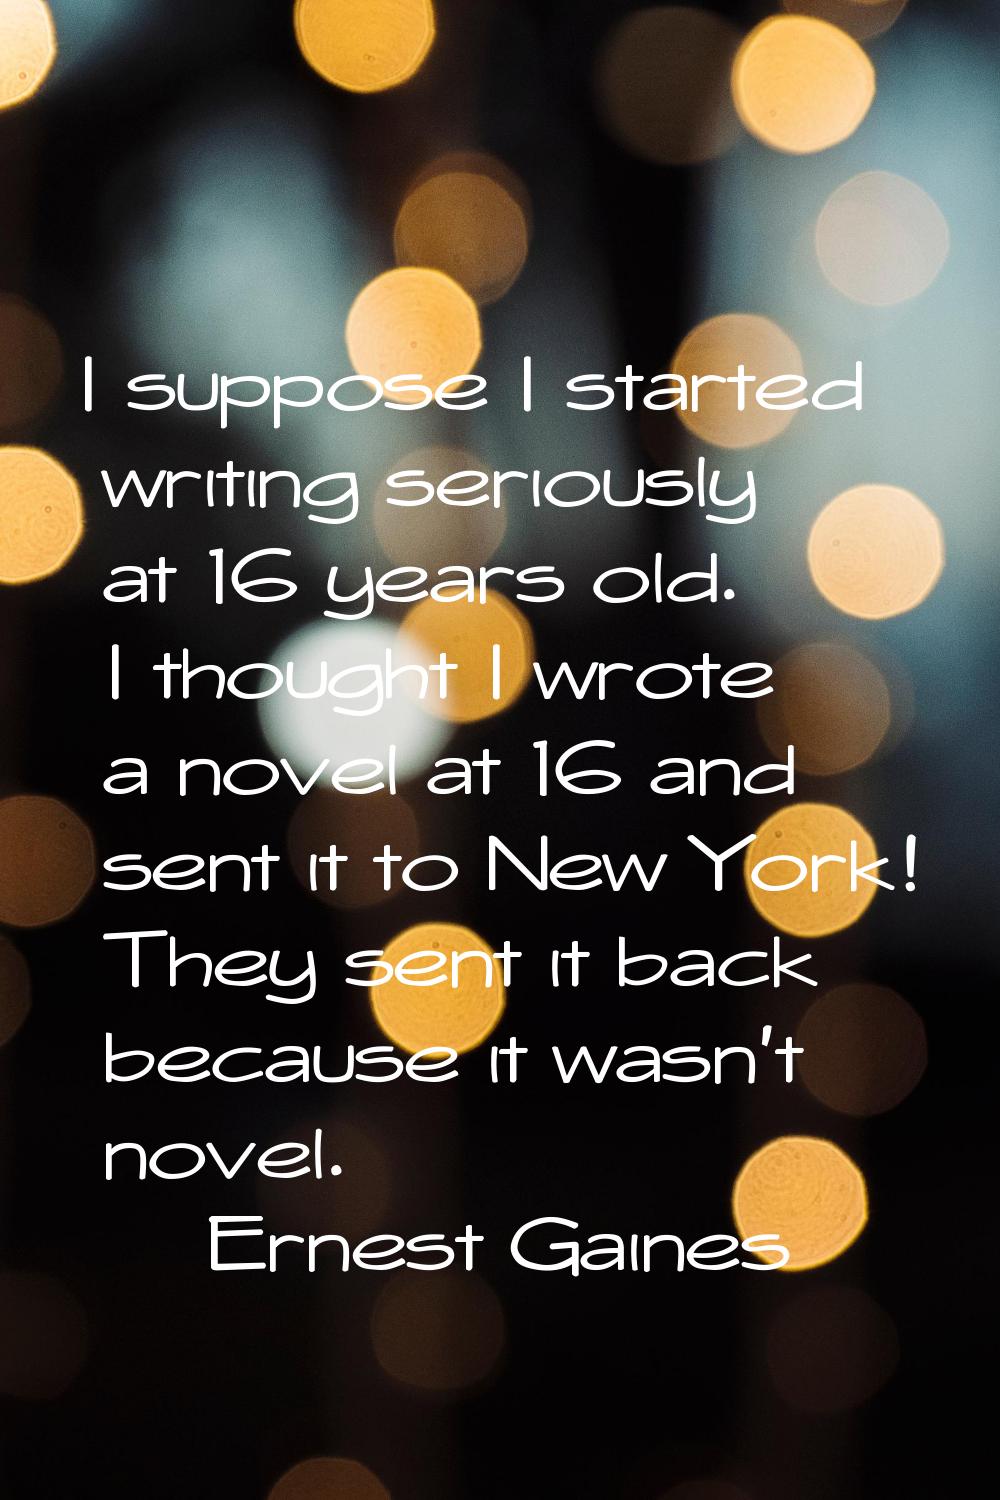 I suppose I started writing seriously at 16 years old. I thought I wrote a novel at 16 and sent it 